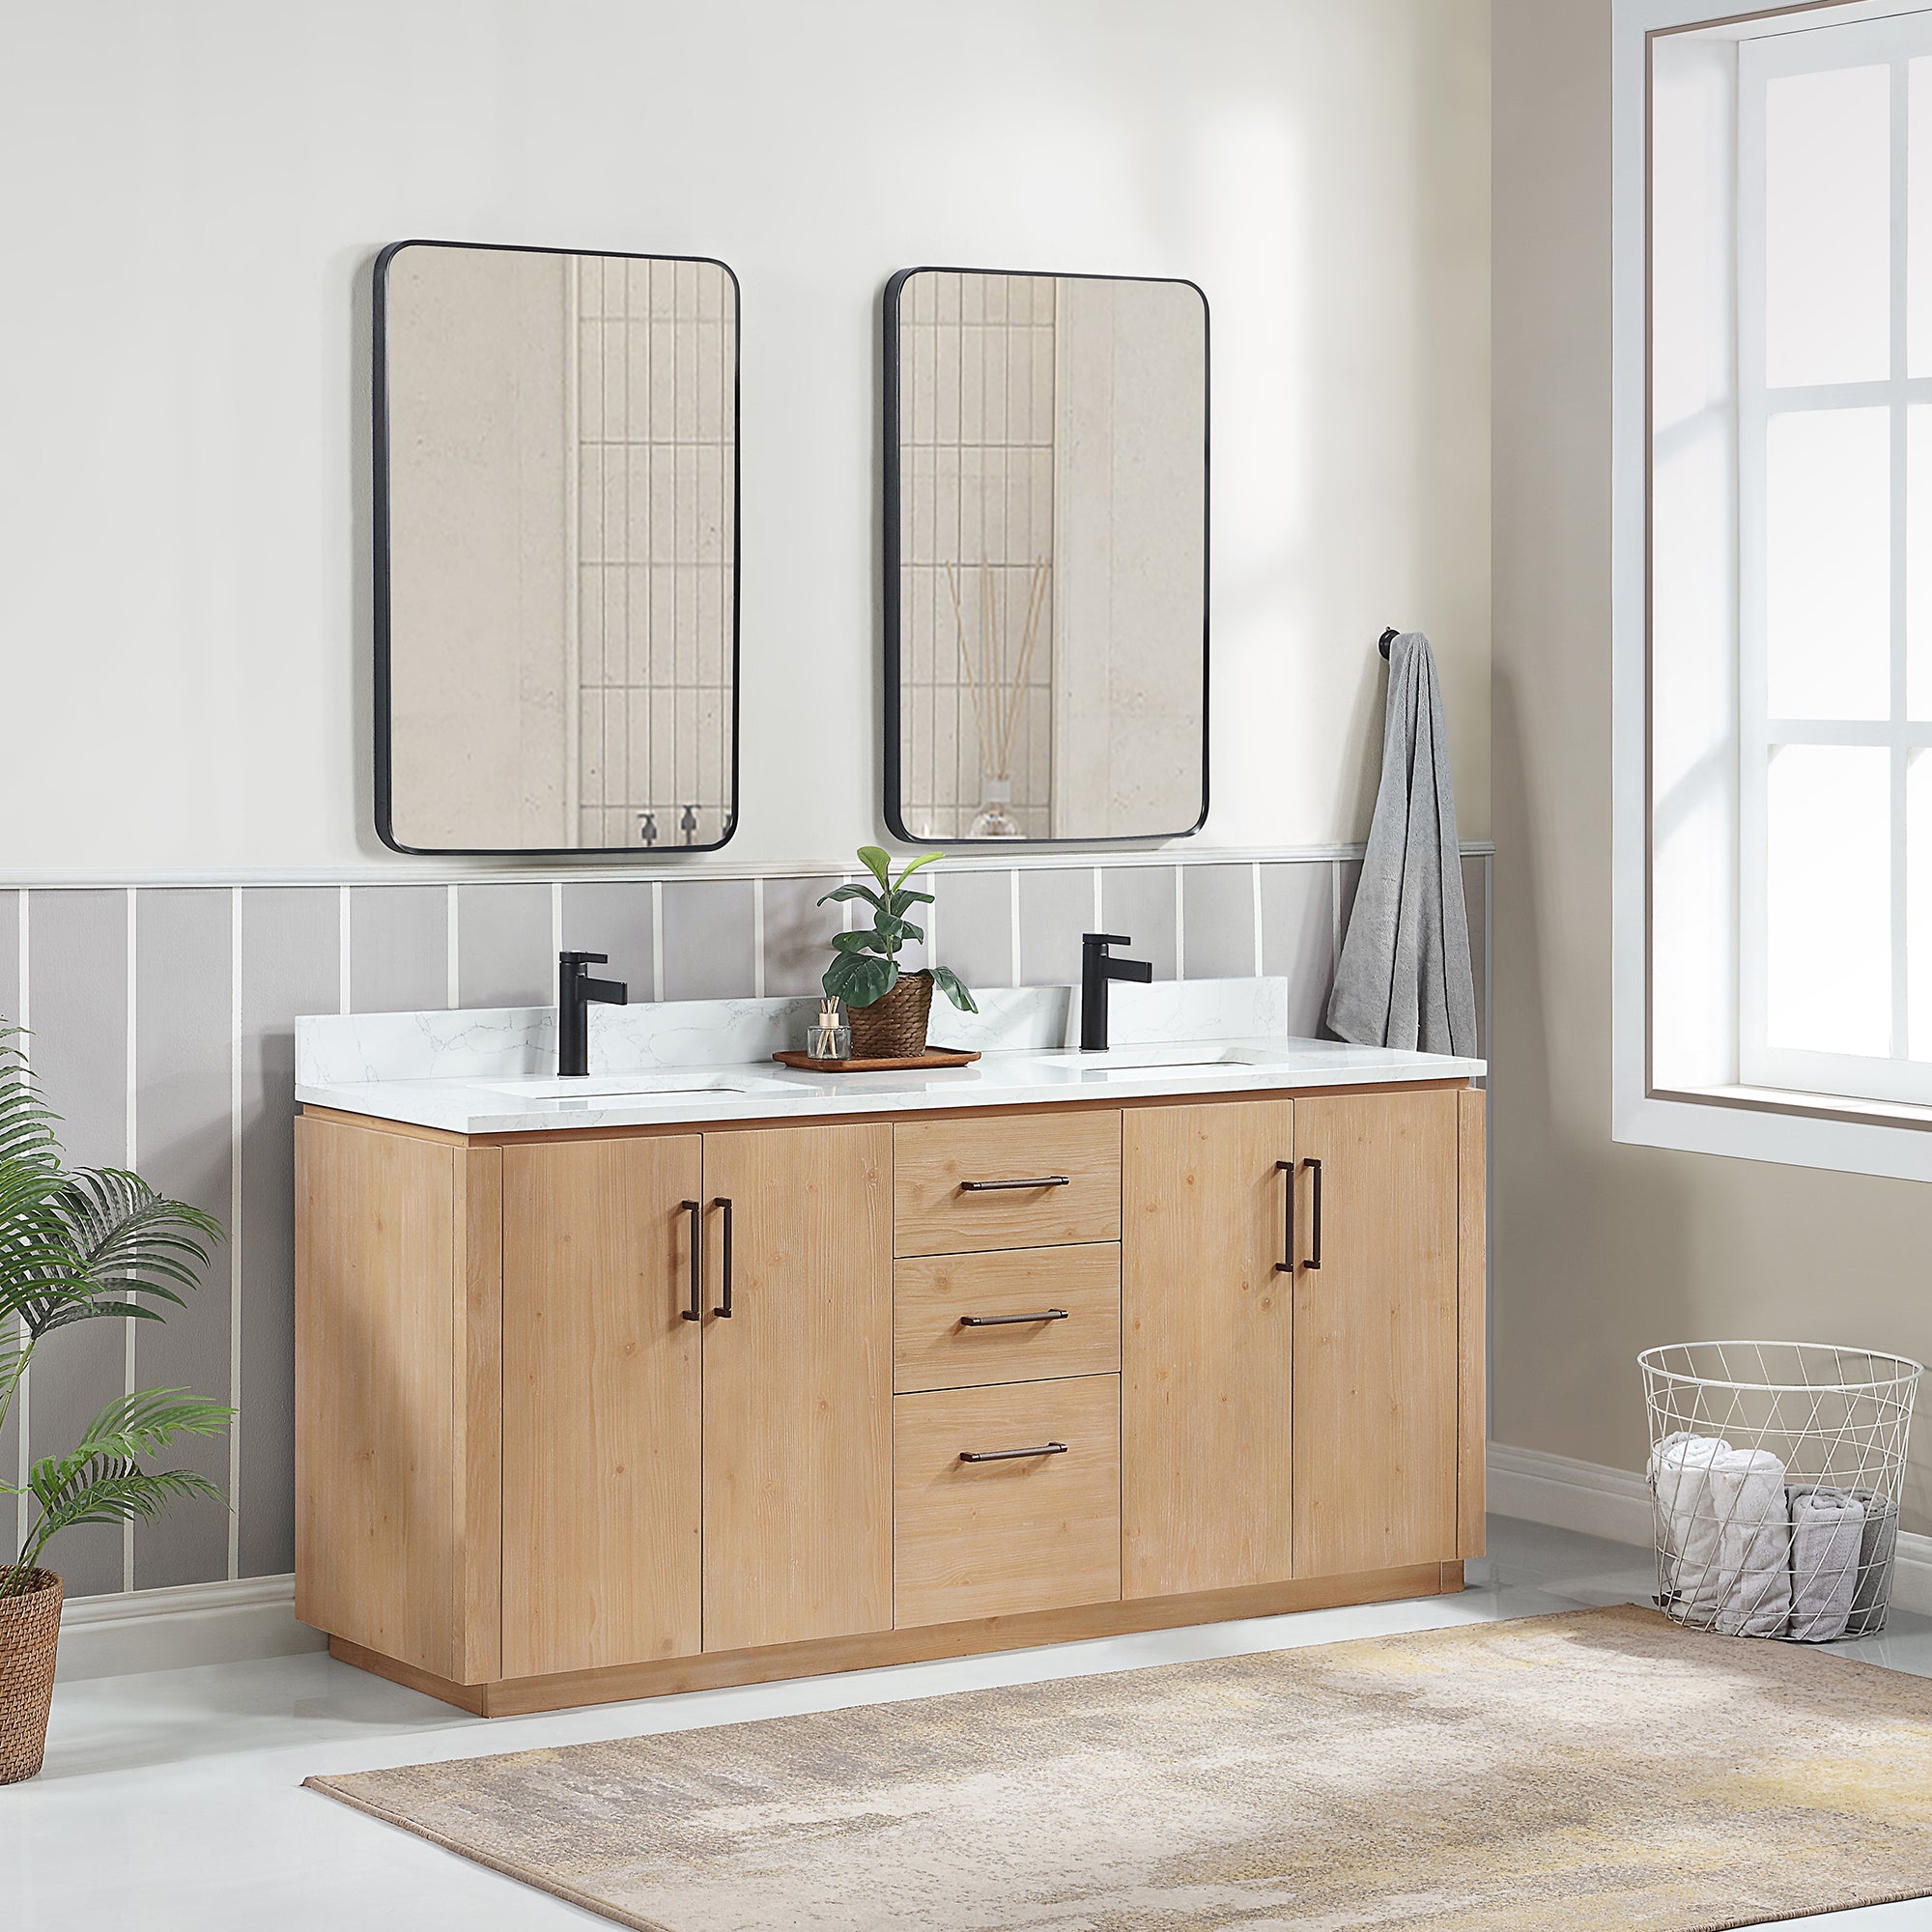 San 72" Free-standing Double Bath Vanity in Fir Wood Brown with White Grain Composite Stone Top